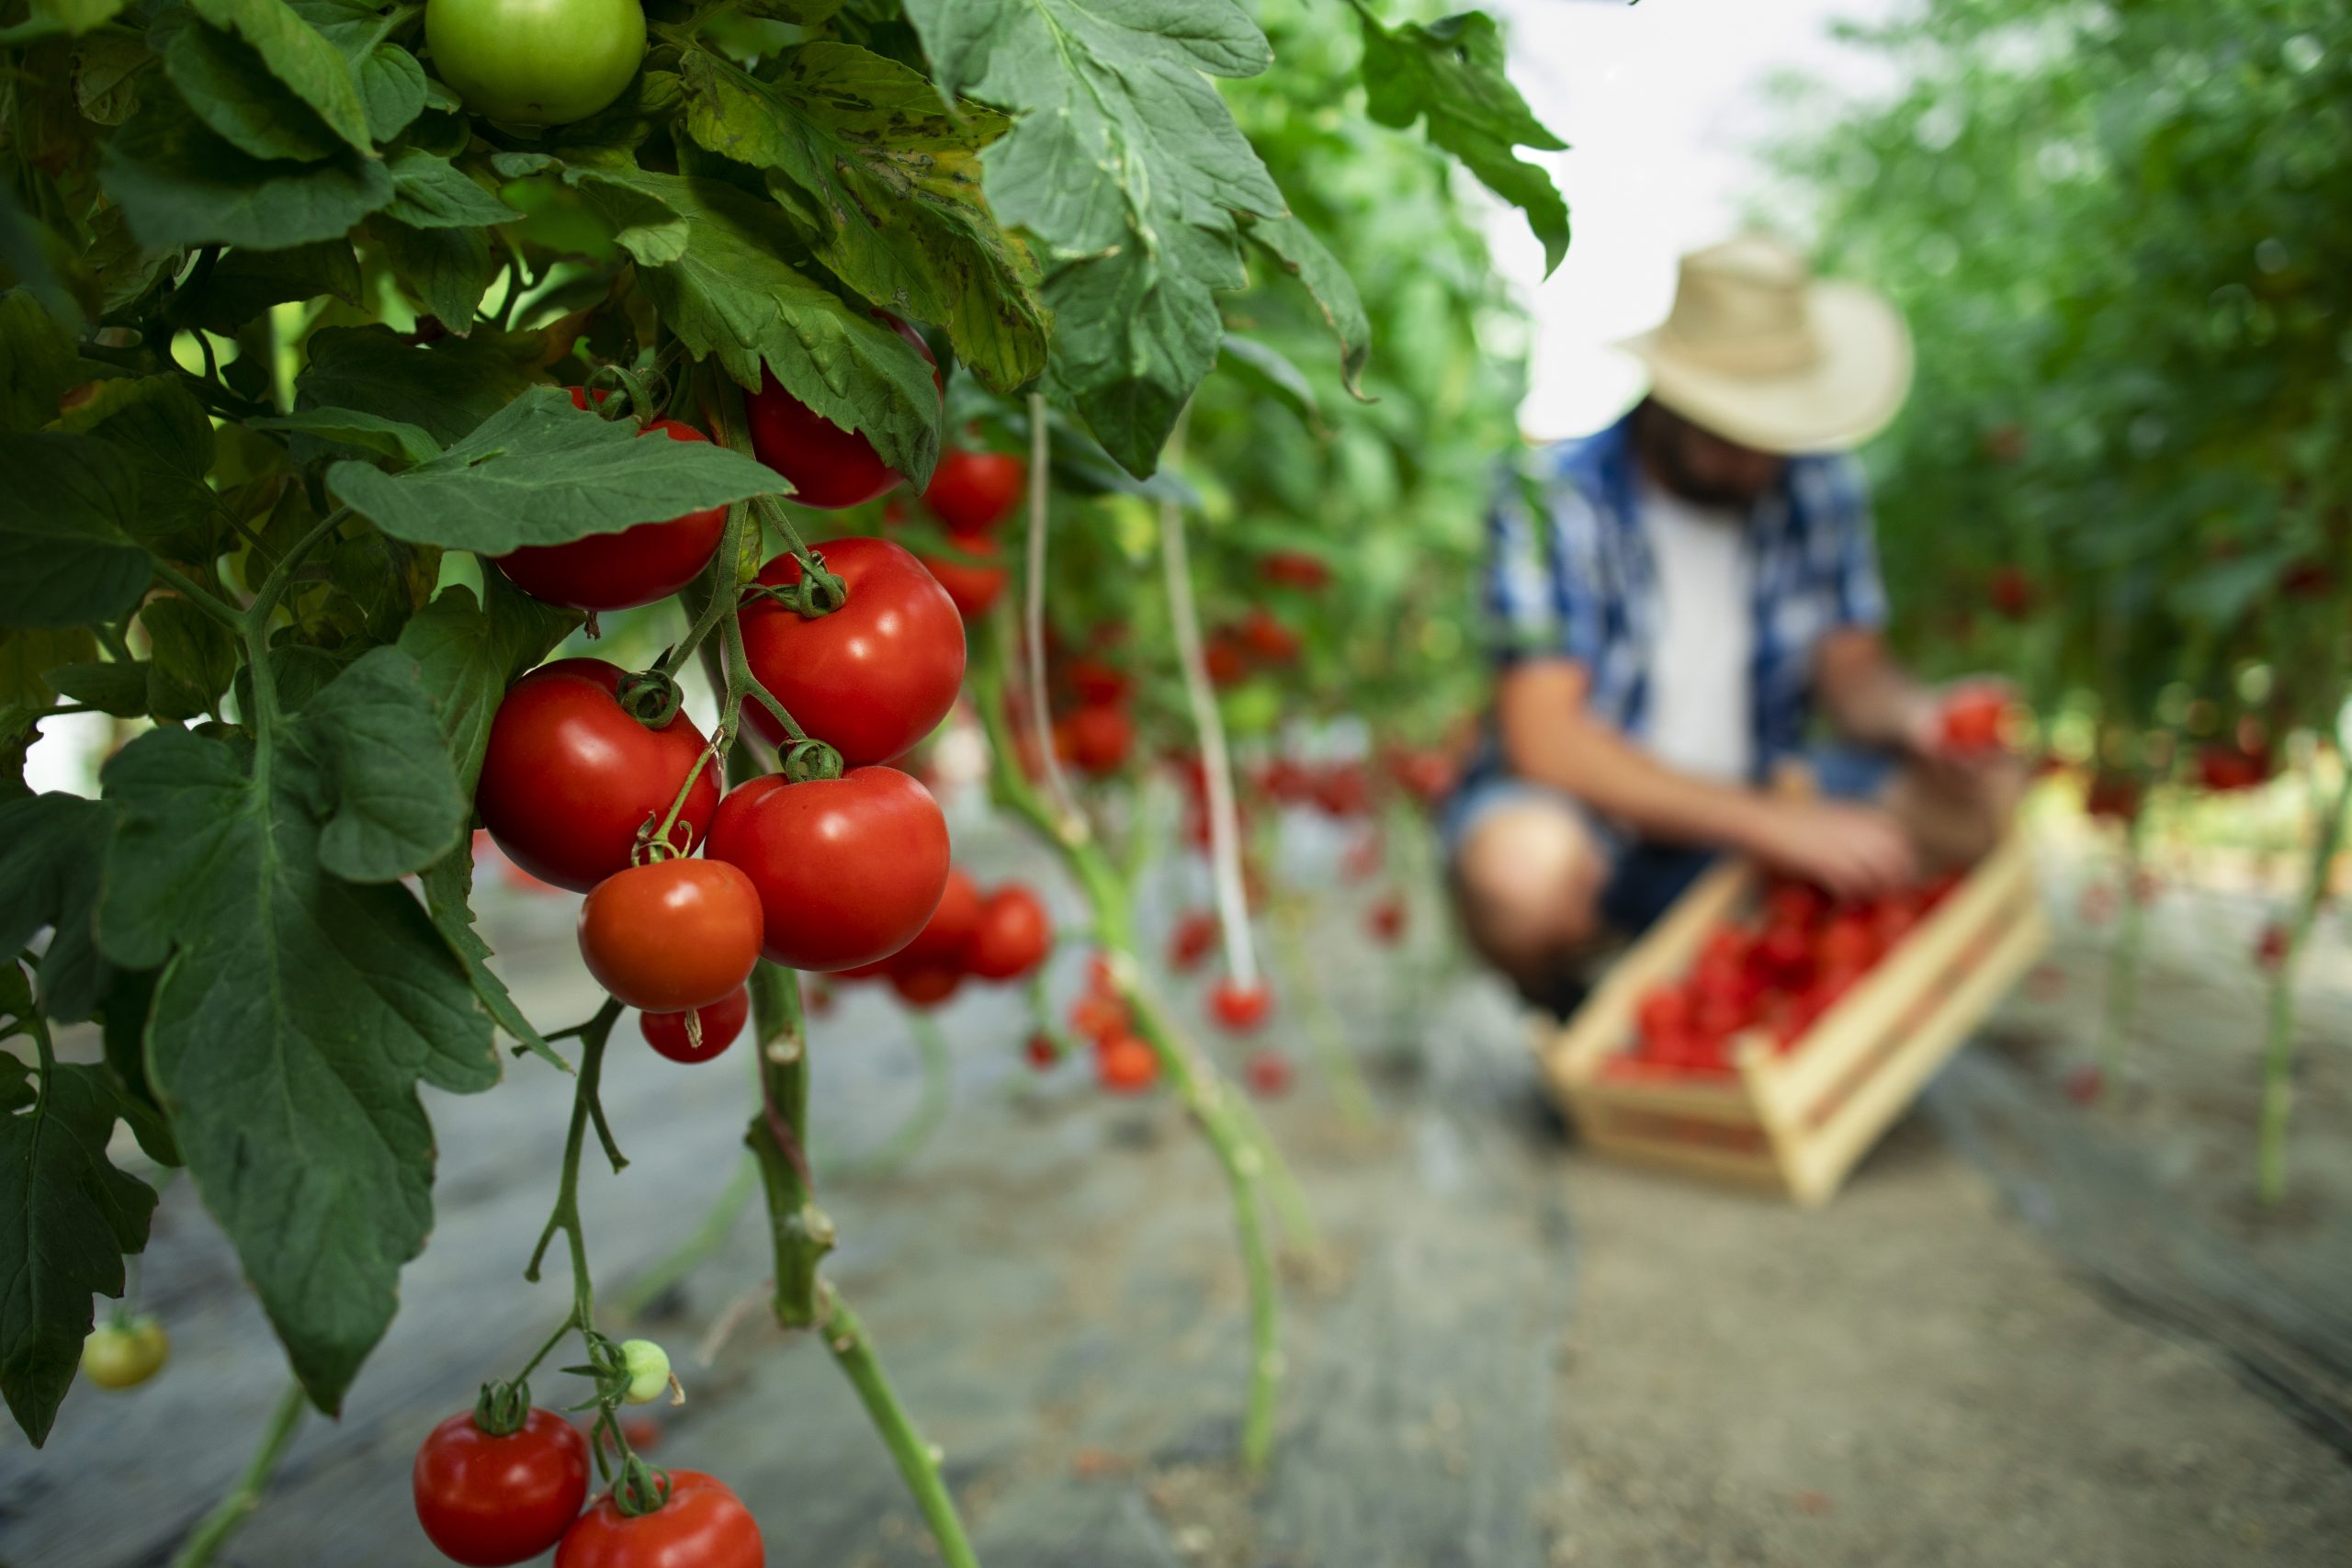 A migrant worker picking Tomatoes in a farm